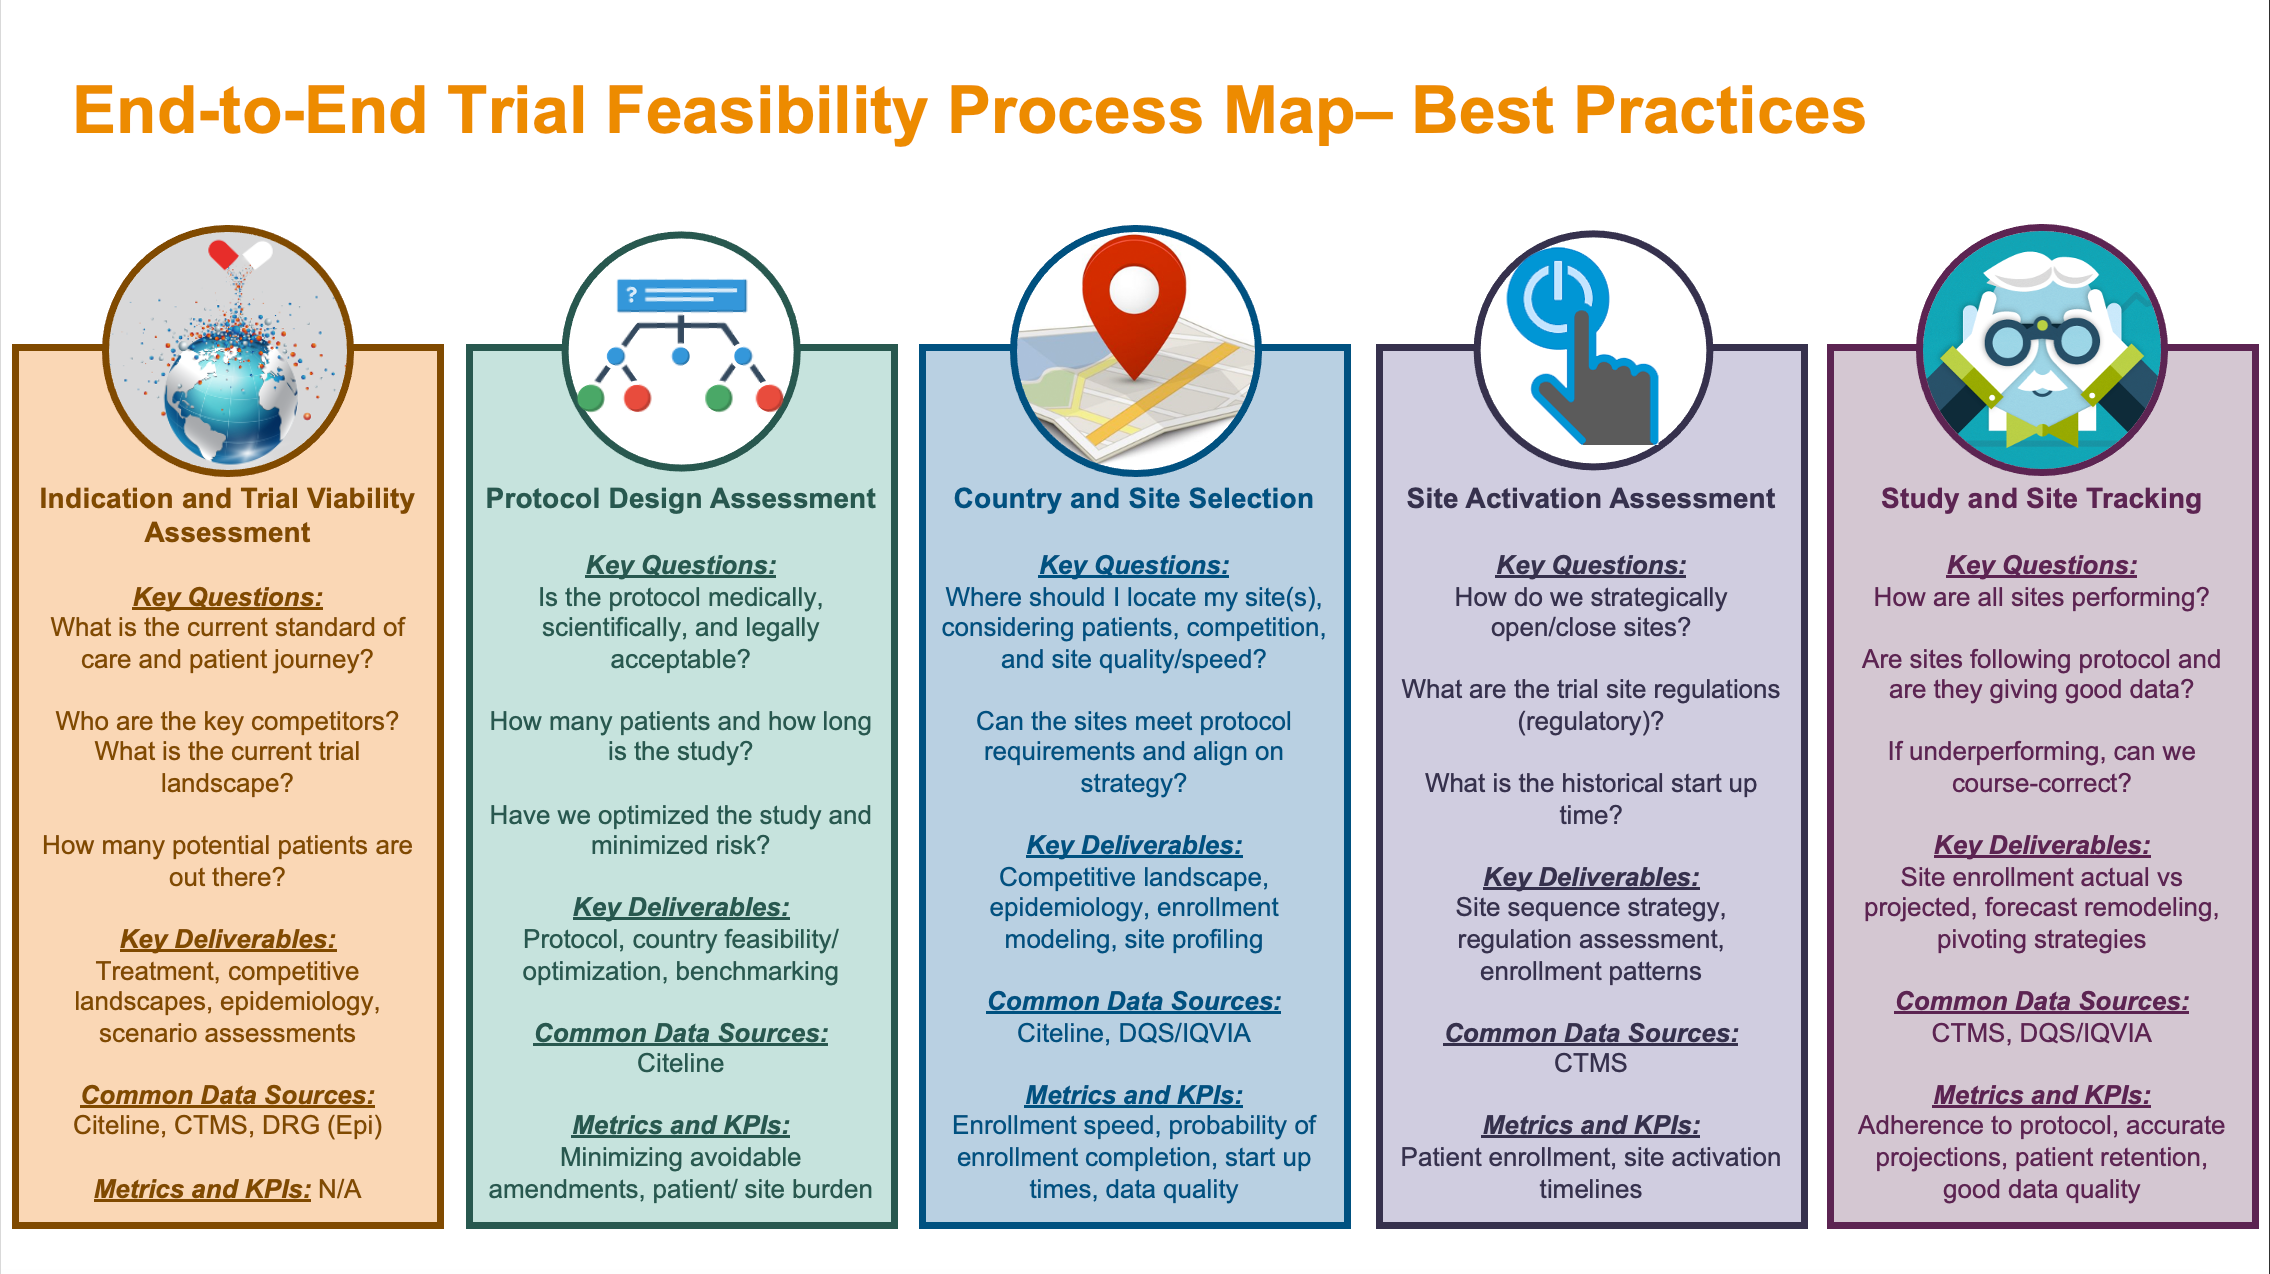 Figure 1: The scope of clinical trial feasibility can be bucketed into five categories of (1) Indication Landscaping and Trial Viability Assessment, (2) Protocol Design Assessment, (3) Country and Site Recommendations, (4) Site Activation Assessment, and (5) Study and Site Tracking. While the last one is not explicitly part of the Feasibility process, it is a method to monitor its effectiveness. Listed are the key questions, deliverables, common data sources, and metrics and key performance indicators for each. These best practices were compiled from extensive surveying and interviewing from our Consortium members, described at the end of the paper.